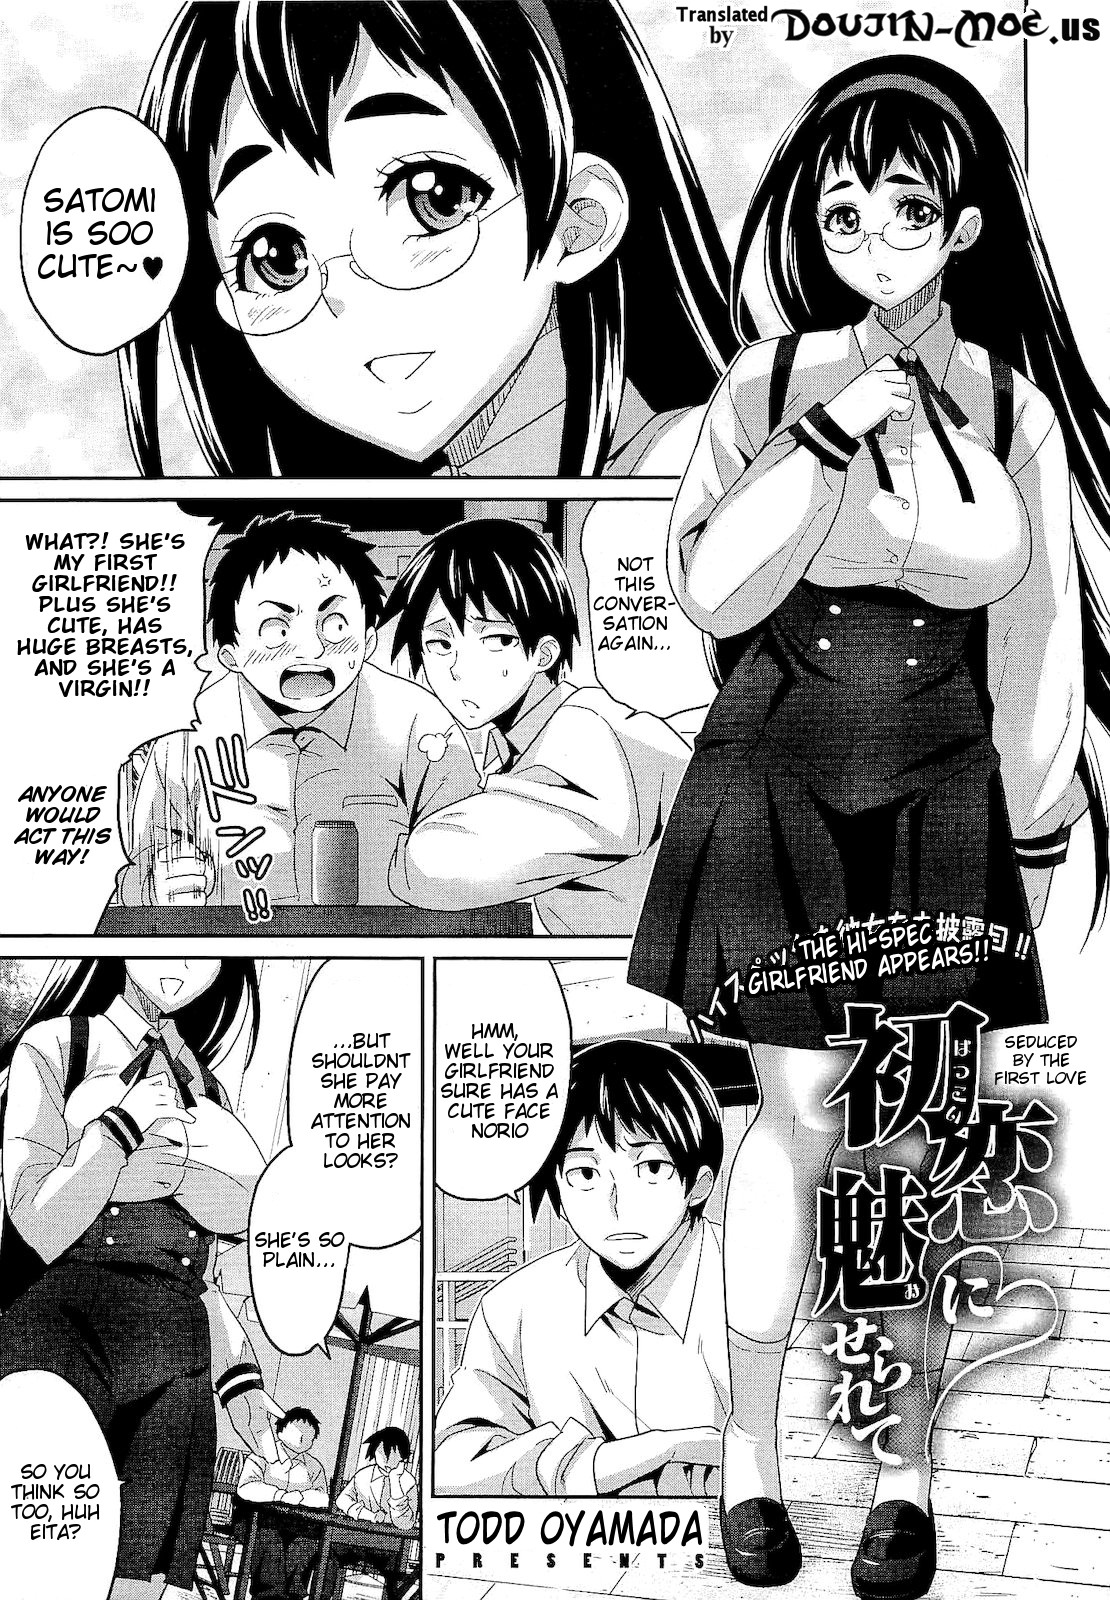 [Todd Oyamada (Todd Special)] Seduced by The First Love (English) {doujin-moe.us} 